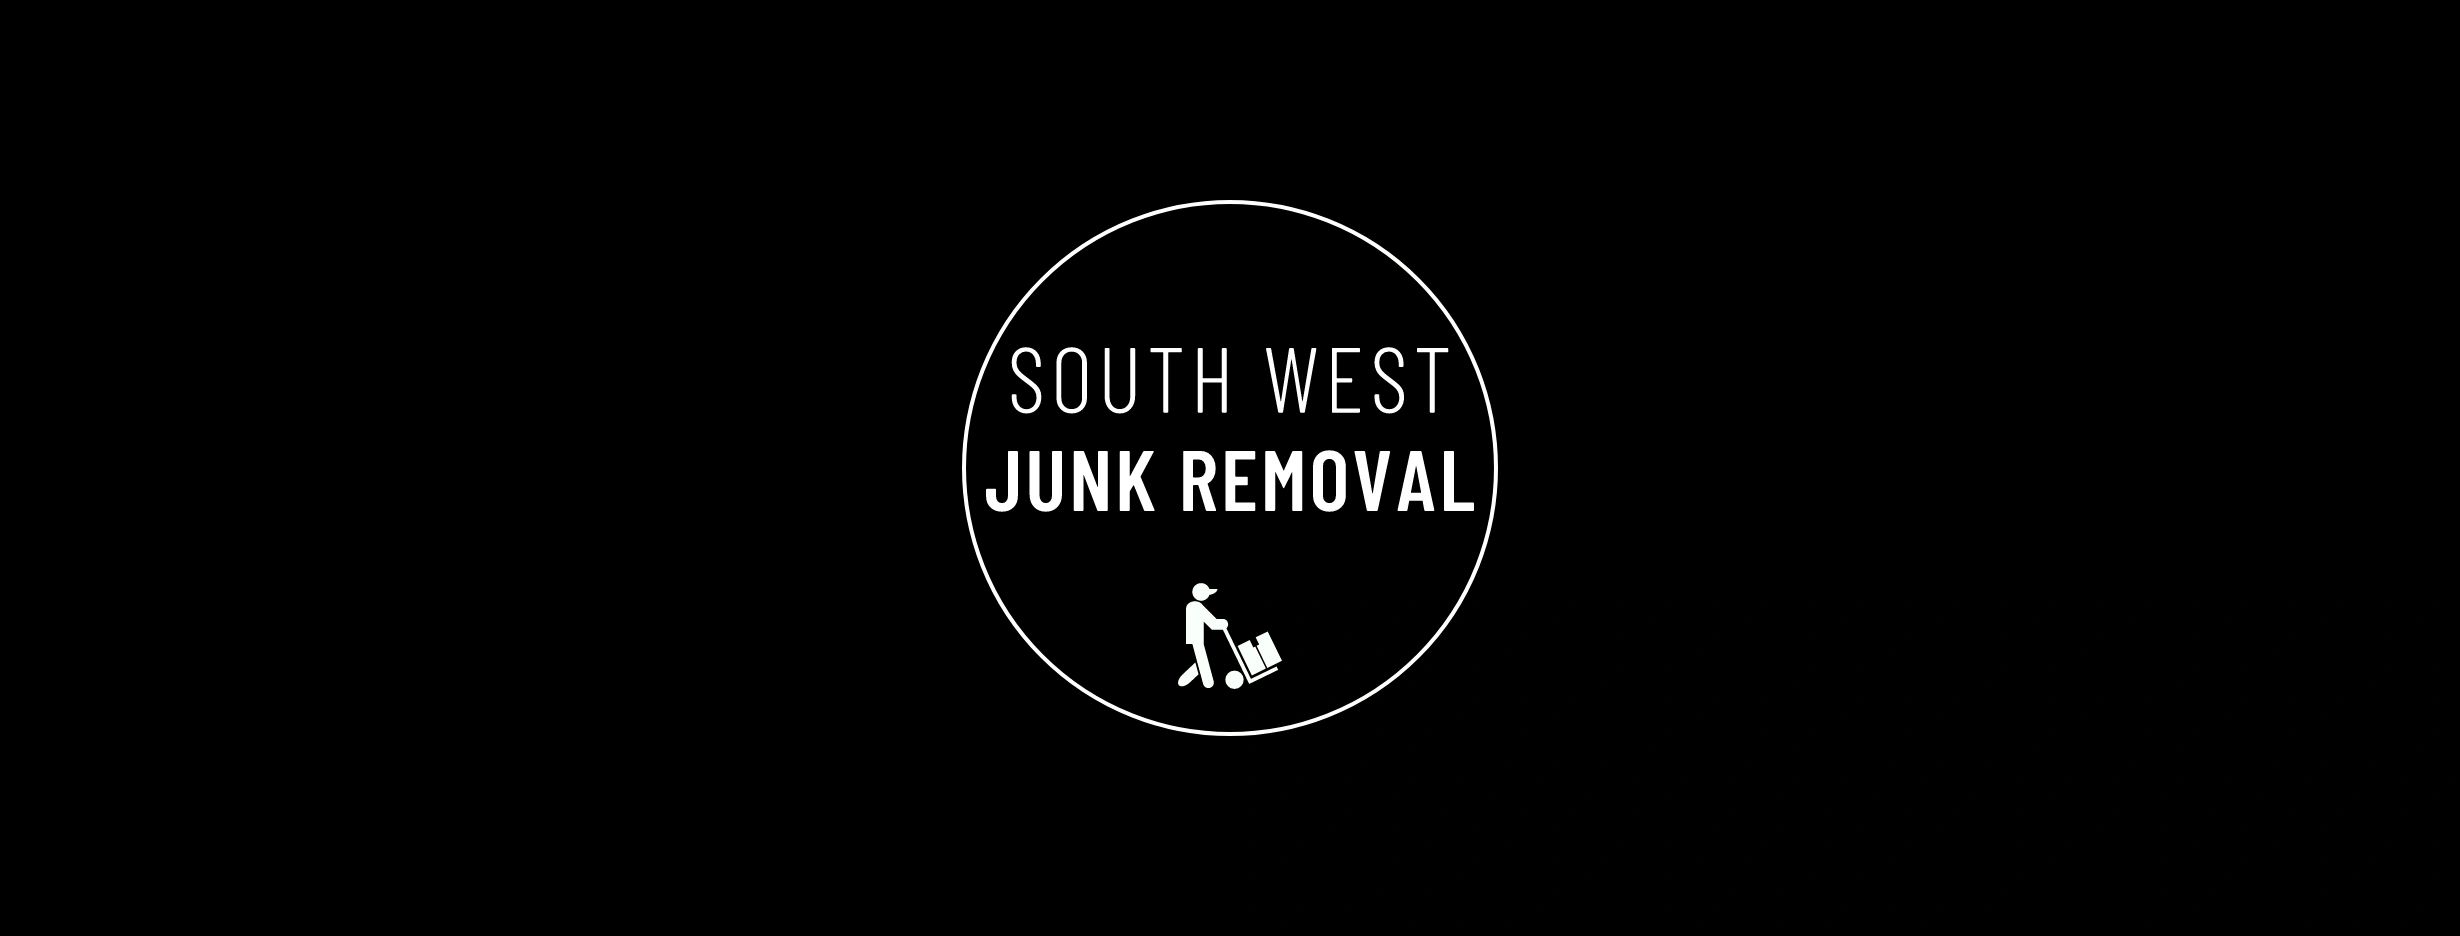 South West Junk Removal Logo
